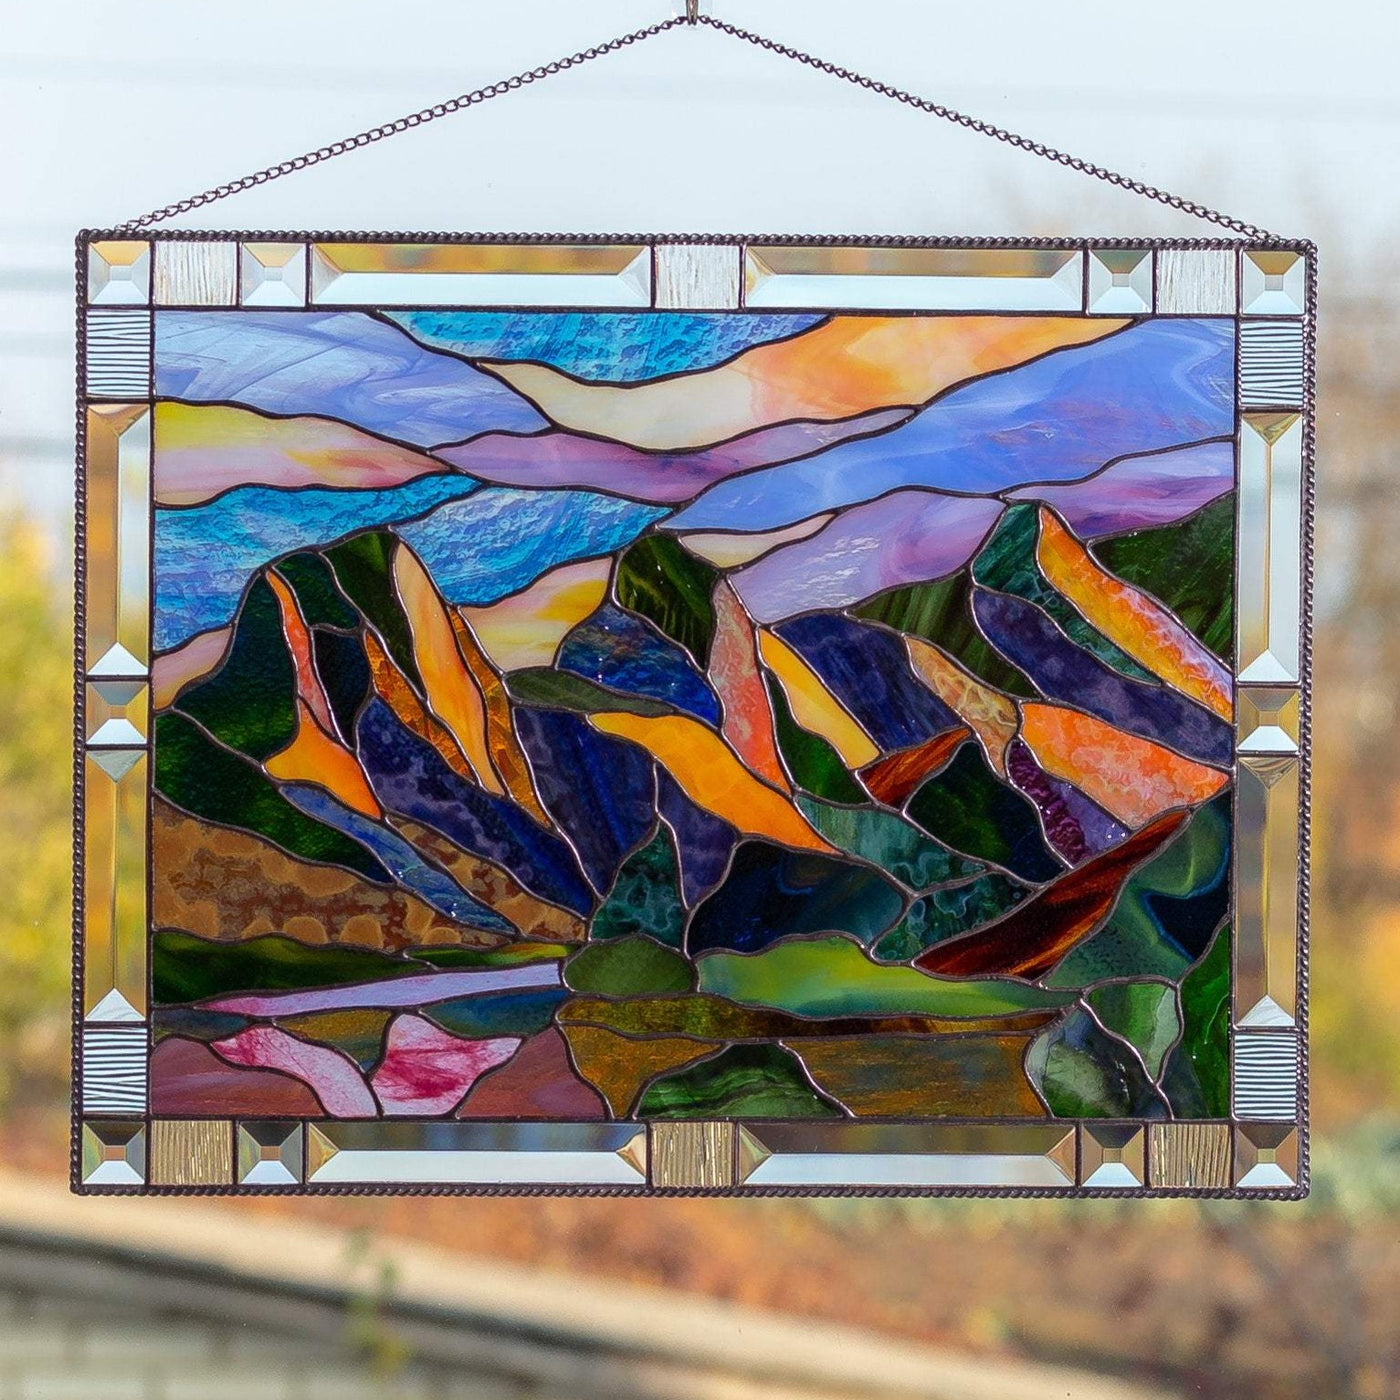 Stained glass panel depicting Three Sisters Mountains with sky of different shades